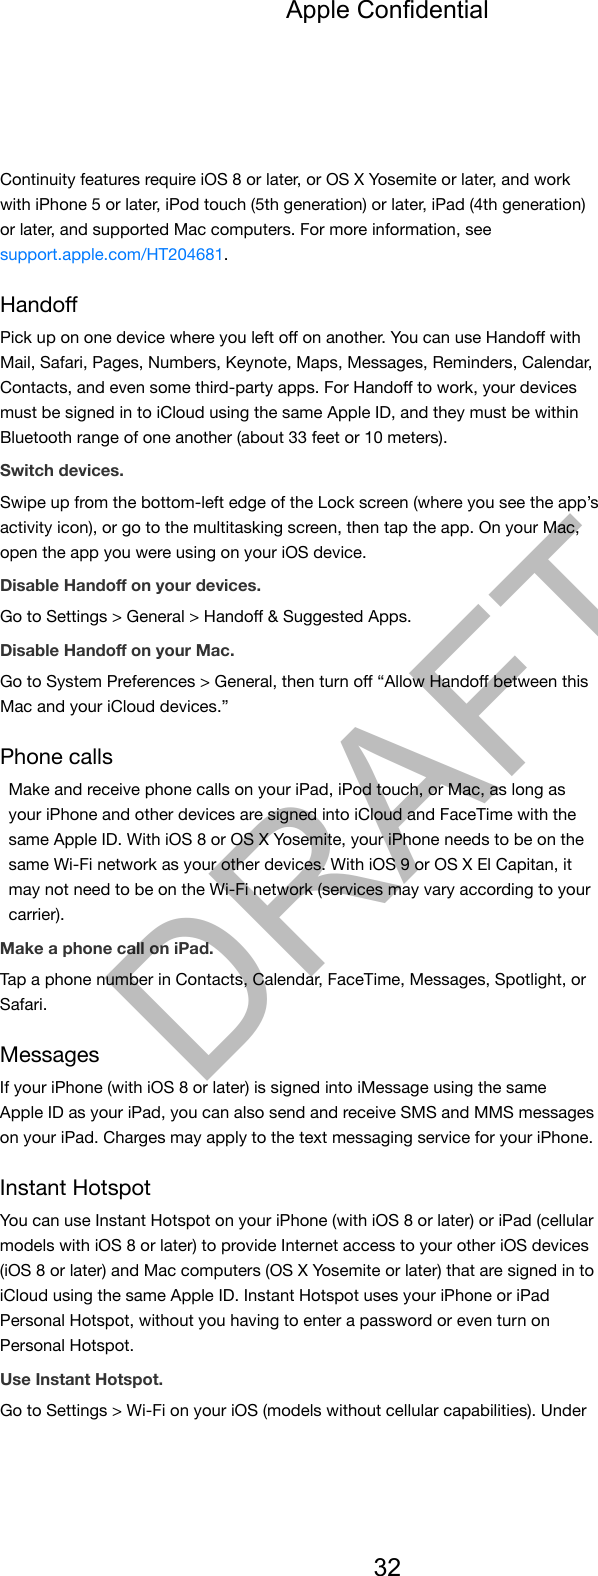 Continuity features require iOS 8 or later, or OS X Yosemite or later, and workwith iPhone 5 or later, iPod touch (5th generation) or later, iPad (4th generation)or later, and supported Mac computers. For more information, seesupport.apple.com/HT204681.HandoﬀPick up on one device where you left oﬀ on another. You can use Handoﬀ withMail, Safari, Pages, Numbers, Keynote, Maps, Messages, Reminders, Calendar,Contacts, and even some third-party apps. For Handoﬀ to work, your devicesmust be signed in to iCloud using the same Apple ID, and they must be withinBluetooth range of one another (about 33 feet or 10 meters).Switch devices.Swipe up from the bottom-left edge of the Lock screen (where you see the app’sactivity icon), or go to the multitasking screen, then tap the app. On your Mac,open the app you were using on your iOS device.Disable Handoﬀ on your devices.Go to Settings &gt; General &gt; Handoﬀ &amp; Suggested Apps.Disable Handoﬀ on your Mac.Go to System Preferences &gt; General, then turn oﬀ “Allow Handoﬀ between thisMac and your iCloud devices.”Phone callsMake and receive phone calls on your iPad, iPod touch, or Mac, as long asyour iPhone and other devices are signed into iCloud and FaceTime with thesame Apple ID. With iOS 8 or OS X Yosemite, your iPhone needs to be on thesame Wi-Fi network as your other devices. With iOS 9 or OS X El Capitan, itmay not need to be on the Wi-Fi network (services may vary according to yourcarrier).Make a phone call on iPad.Tap a phone number in Contacts, Calendar, FaceTime, Messages, Spotlight, orSafari.MessagesIf your iPhone (with iOS 8 or later) is signed into iMessage using the sameApple ID as your iPad, you can also send and receive SMS and MMS messageson your iPad. Charges may apply to the text messaging service for your iPhone.Instant HotspotYou can use Instant Hotspot on your iPhone (with iOS 8 or later) or iPad (cellularmodels with iOS 8 or later) to provide Internet access to your other iOS devices(iOS 8 or later) and Mac computers (OS X Yosemite or later) that are signed in toiCloud using the same Apple ID. Instant Hotspot uses your iPhone or iPadPersonal Hotspot, without you having to enter a password or even turn onPersonal Hotspot.Use Instant Hotspot.Go to Settings &gt; Wi-Fi on your iOS (models without cellular capabilities). UnderApple Confidential32DRAFT